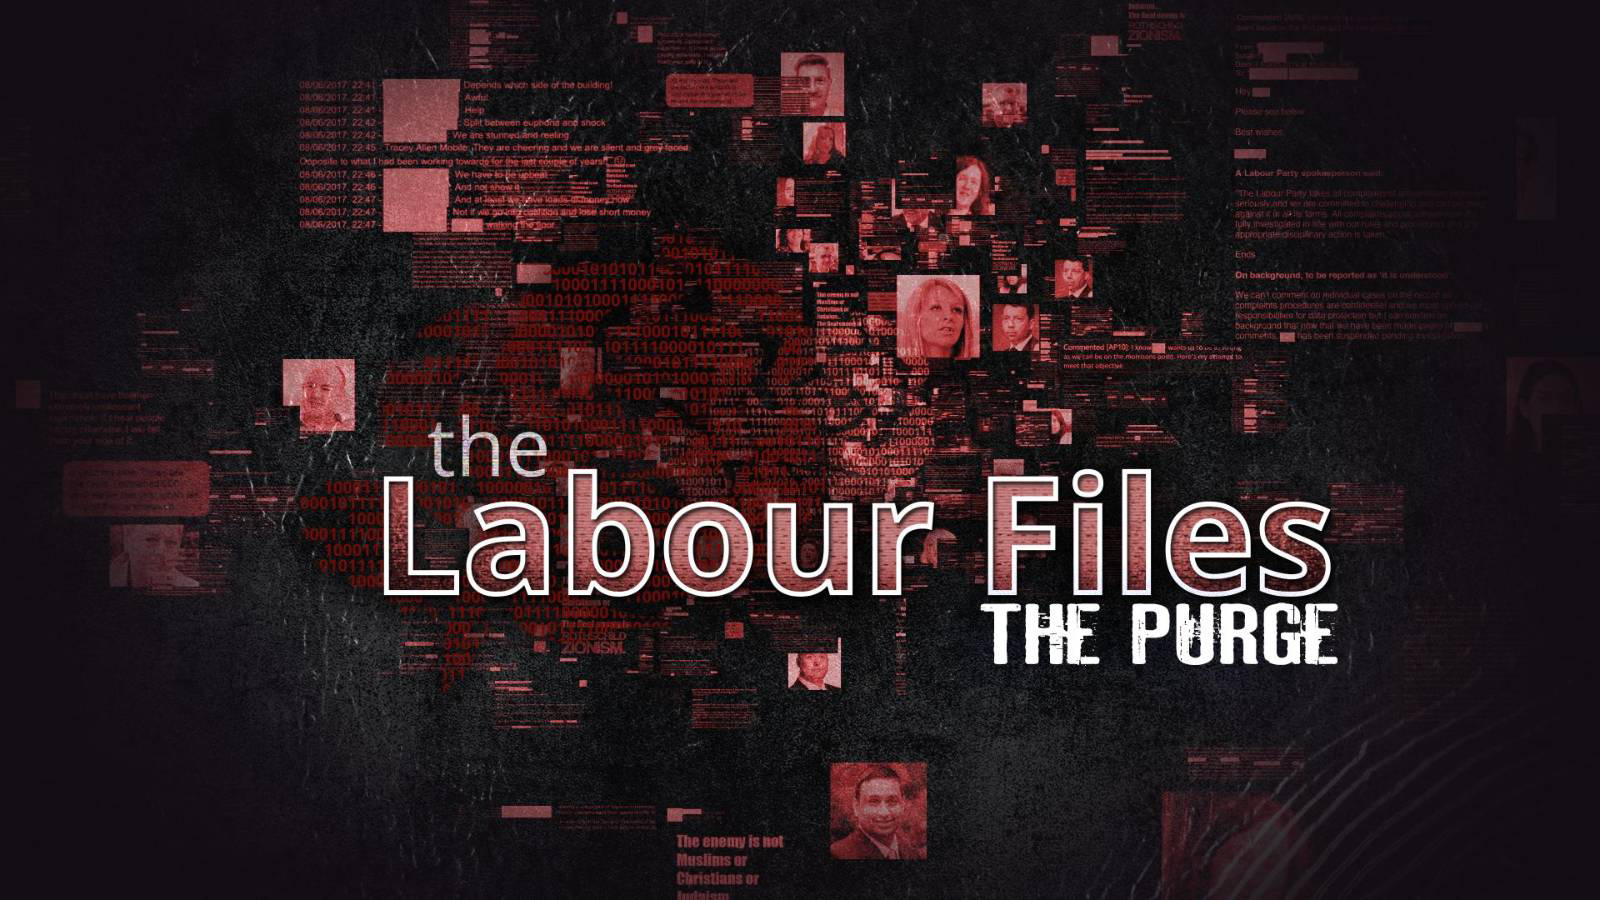 The Labour Files - The Purge